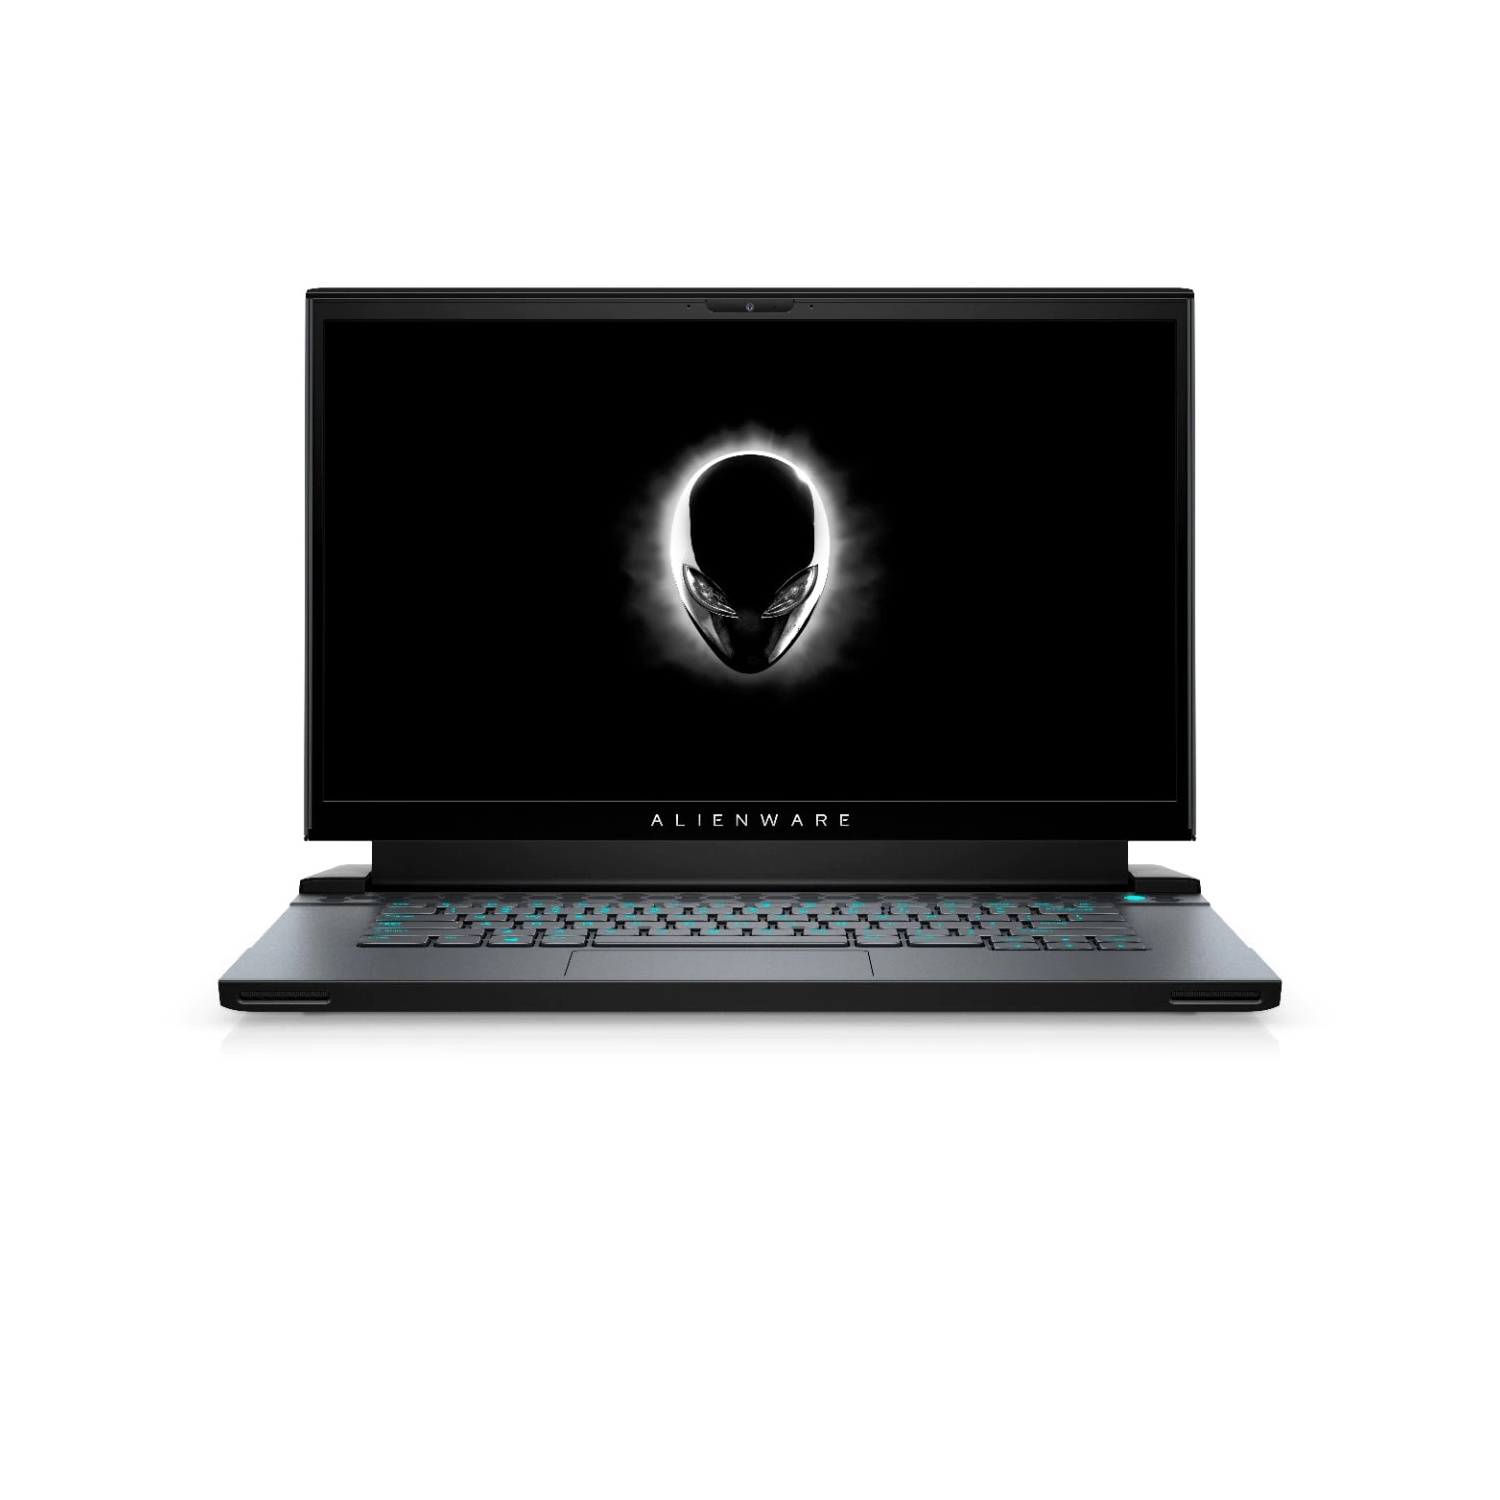 Refurbished (Excellent) - Dell Alienware m15 R4 Gaming Laptop (2021), 15.6" FHD, Core i7, 1TB SSD, 32GB RAM, RTX 3070, 8 Cores @ 5 GHz, 10th Gen CPU Certified Refurbished